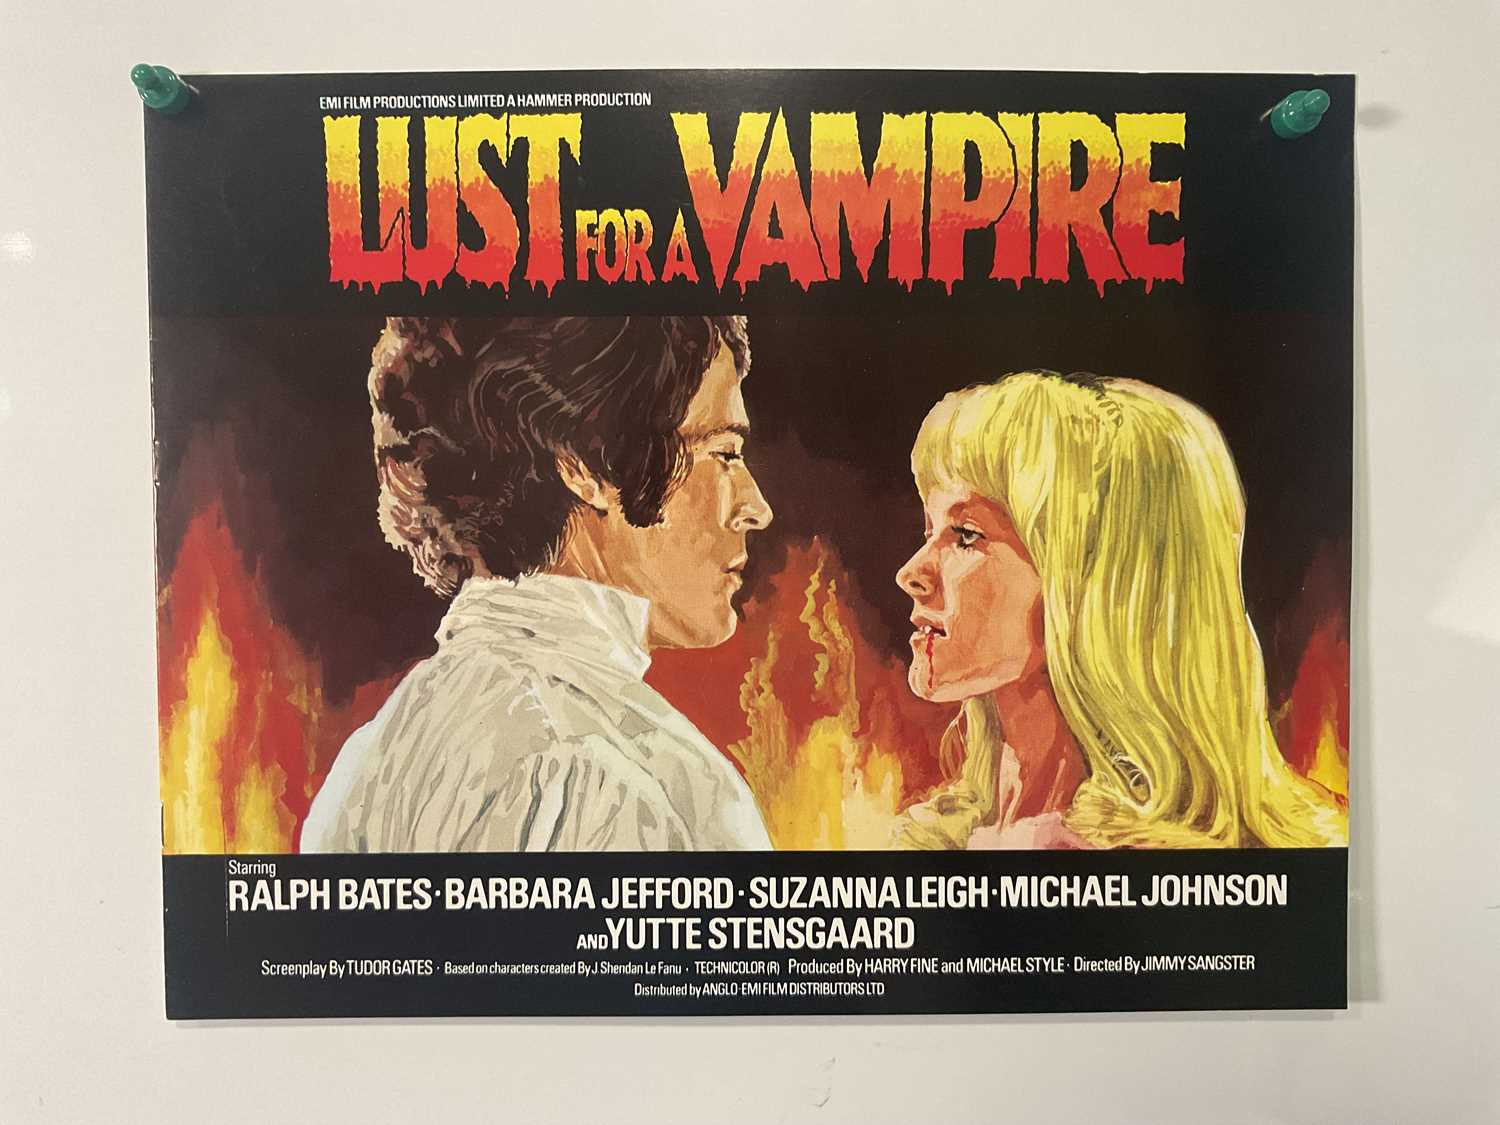 LUST FOR A VAMPIRE (1971) set of 8 lobby cards and press book together with THE WICKER MAN (1973) - Image 3 of 3